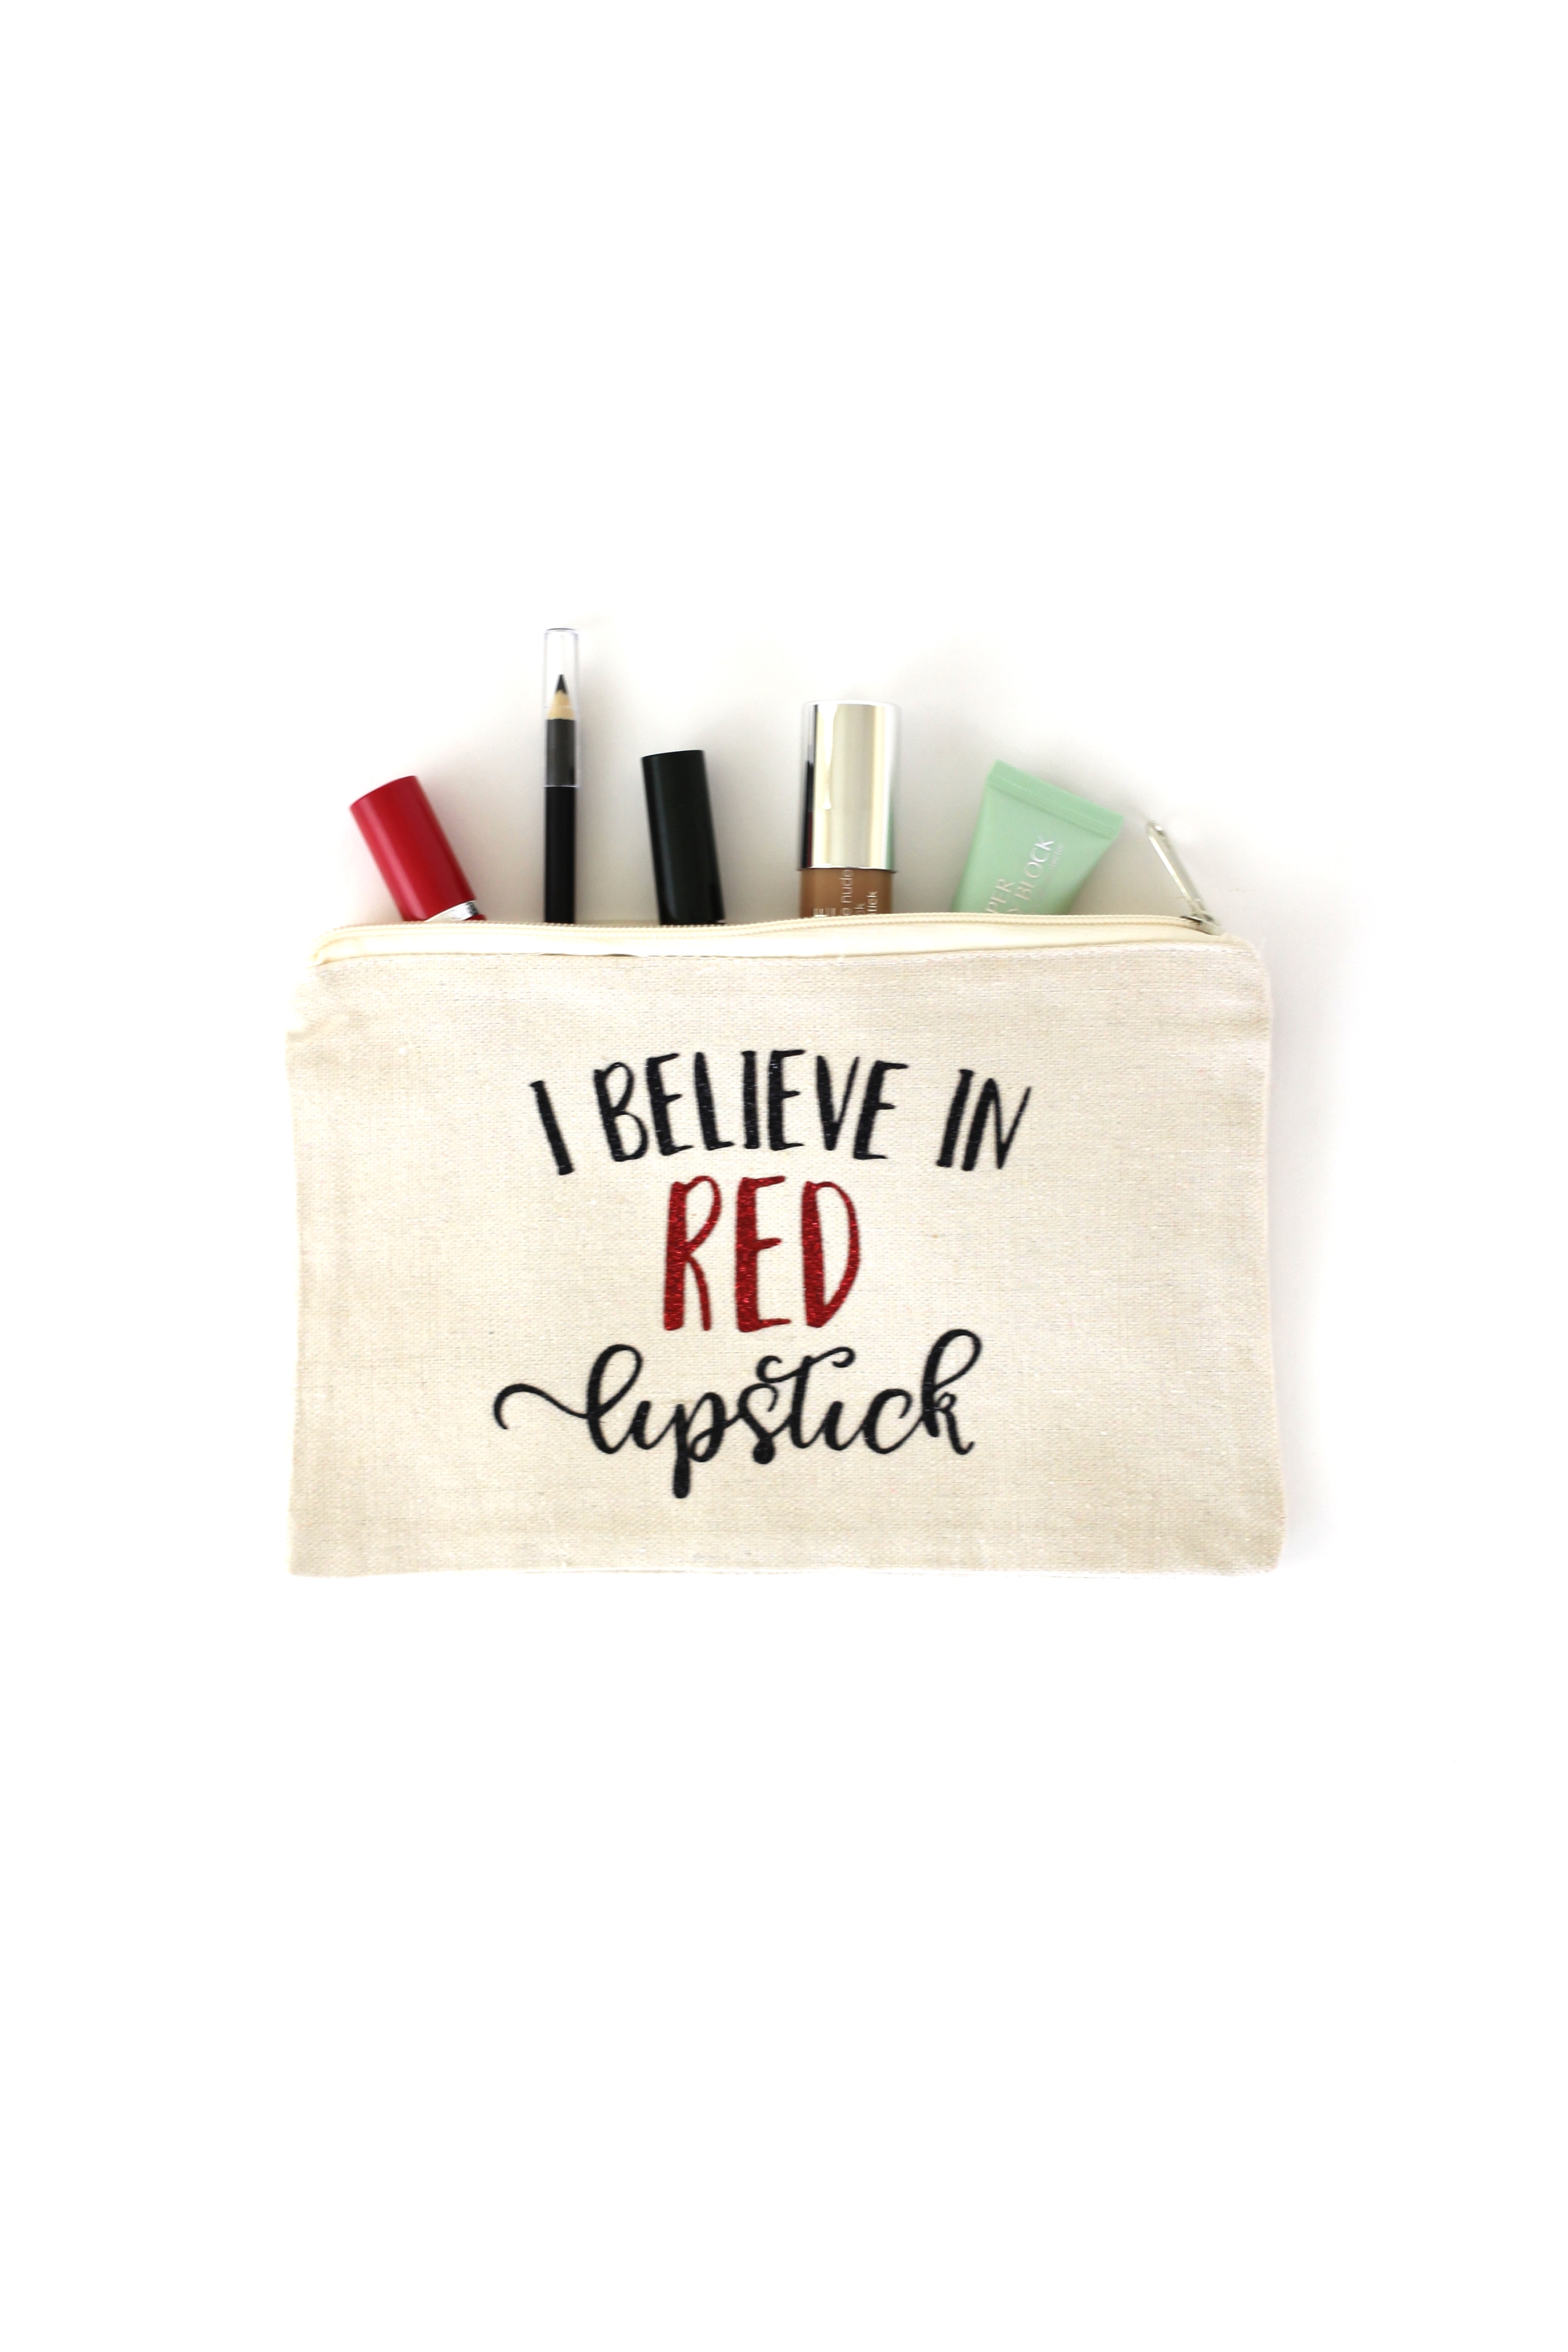 Make your own "I Believe in Red Lipstick" makeup bag to help keep your purse or makeup drawer organized! Click here to see more.